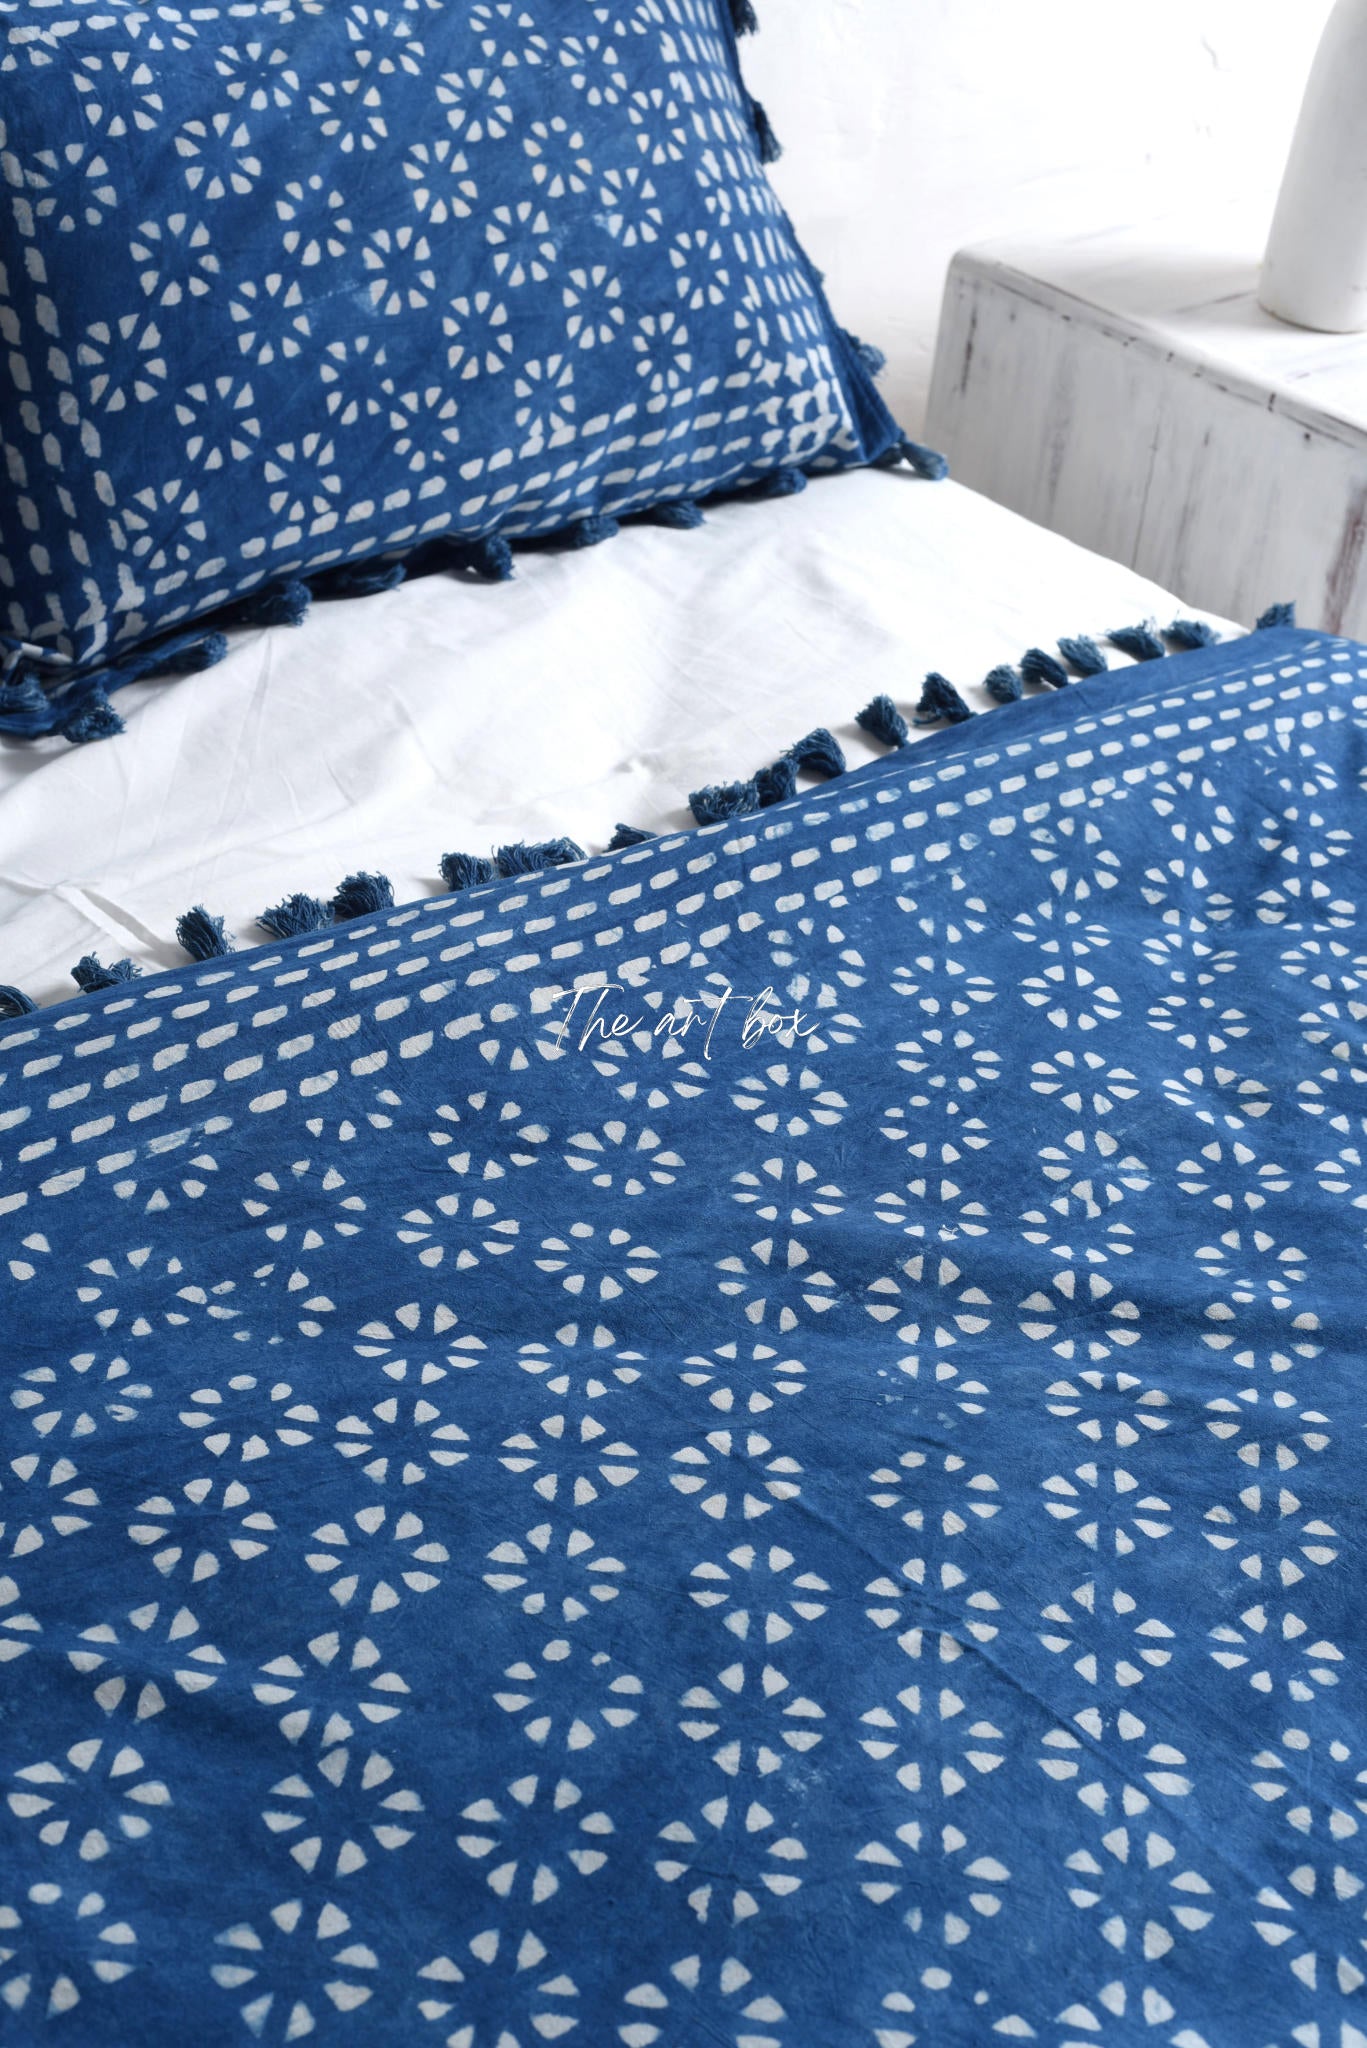 Boho Aesthetic Stone Washed Block Printed Duvet Cover and Pillow Set